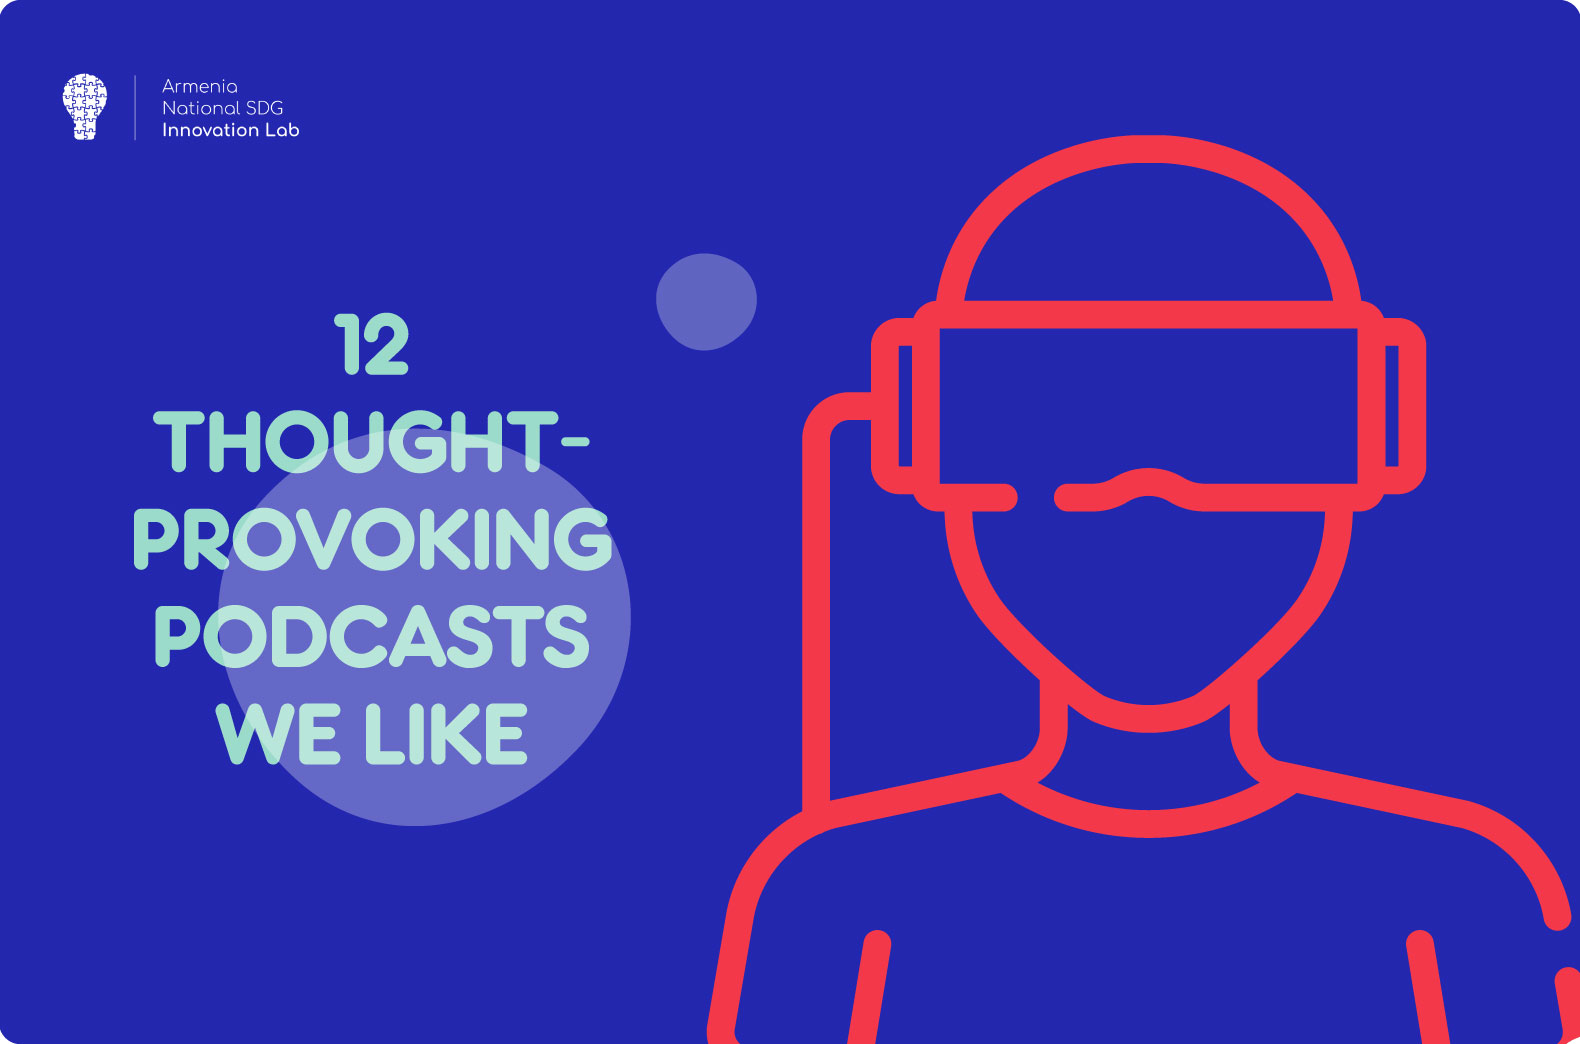 12 thought-provoking podcasts we like